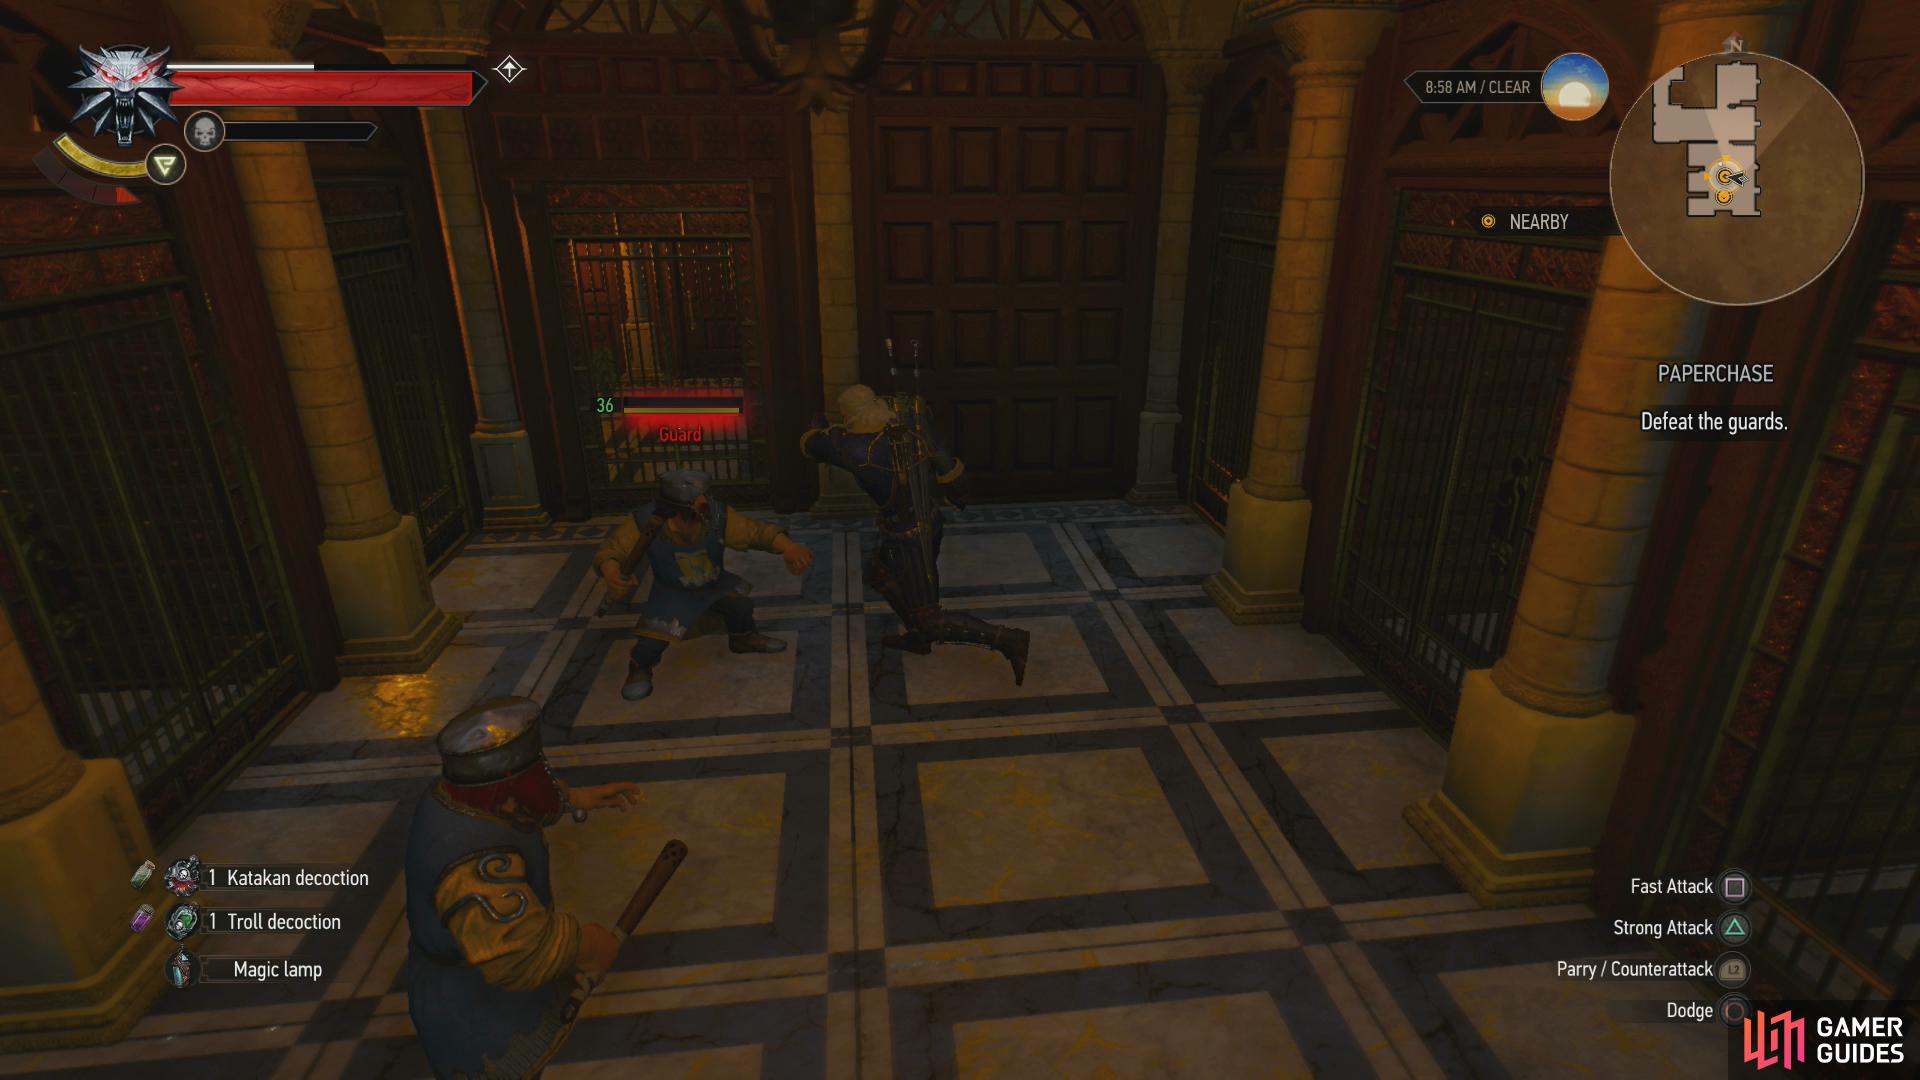 If you lose your temper, youll have to engage in fisticuffs with two guards.